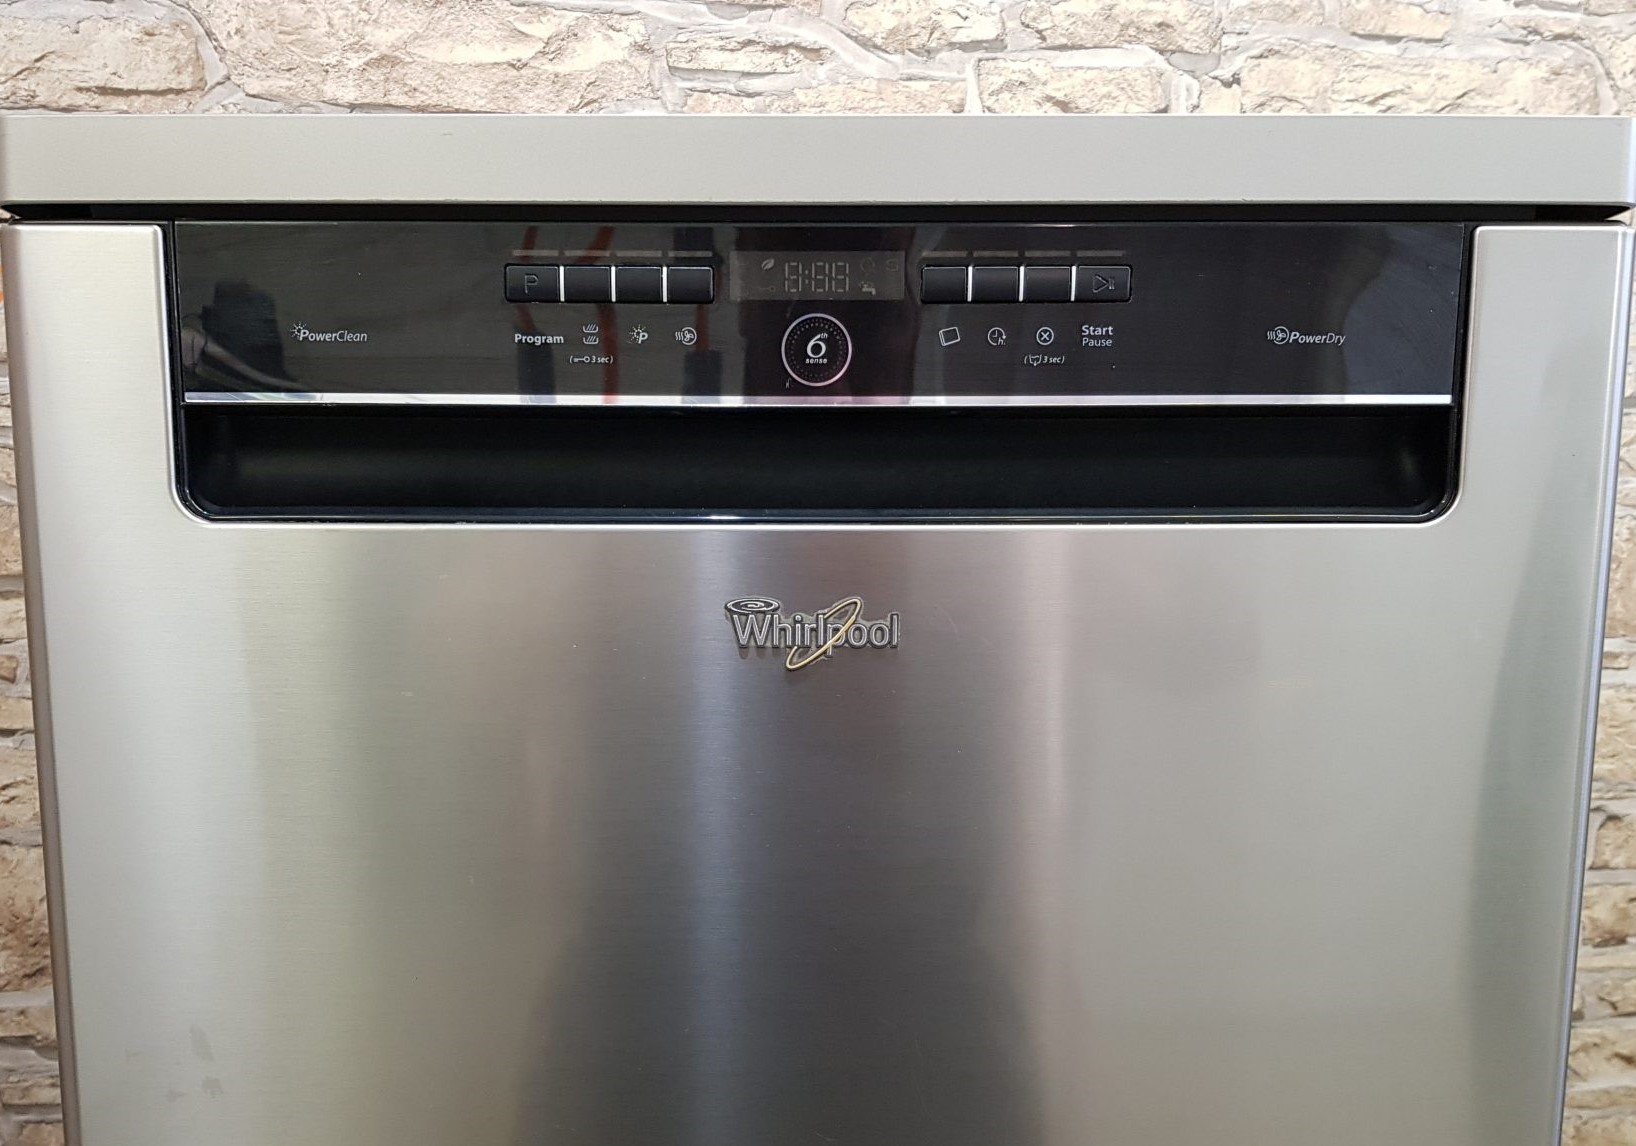 How To Fix The Error Code 45231 For Whirlpool Dishwasher